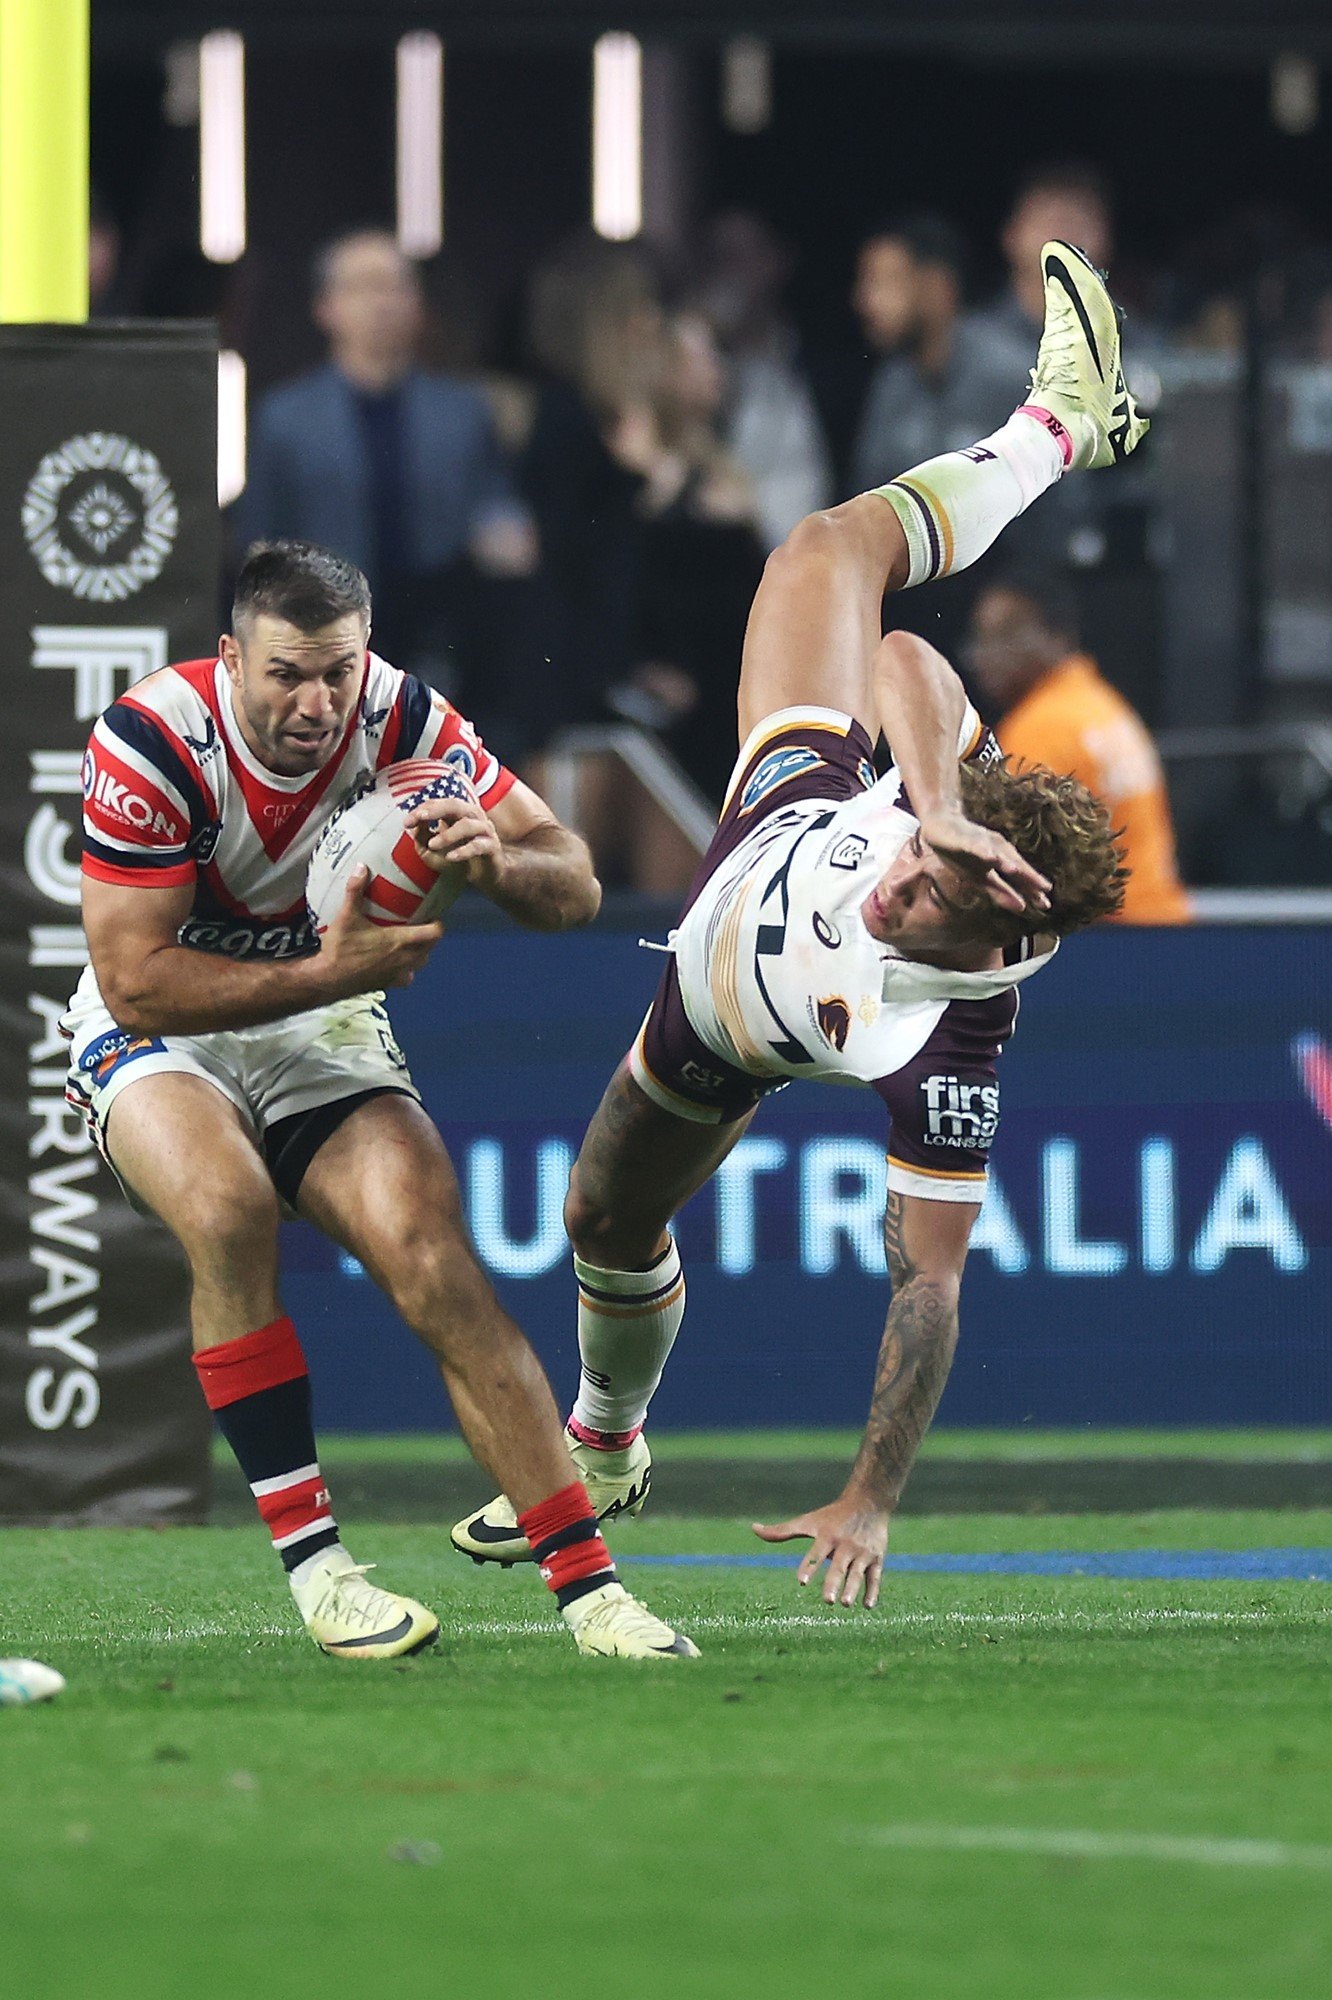 Sydney Roosters fullback James Tedesco with the ball sends Brisbane Broncos fullback Reece Walsh flying.